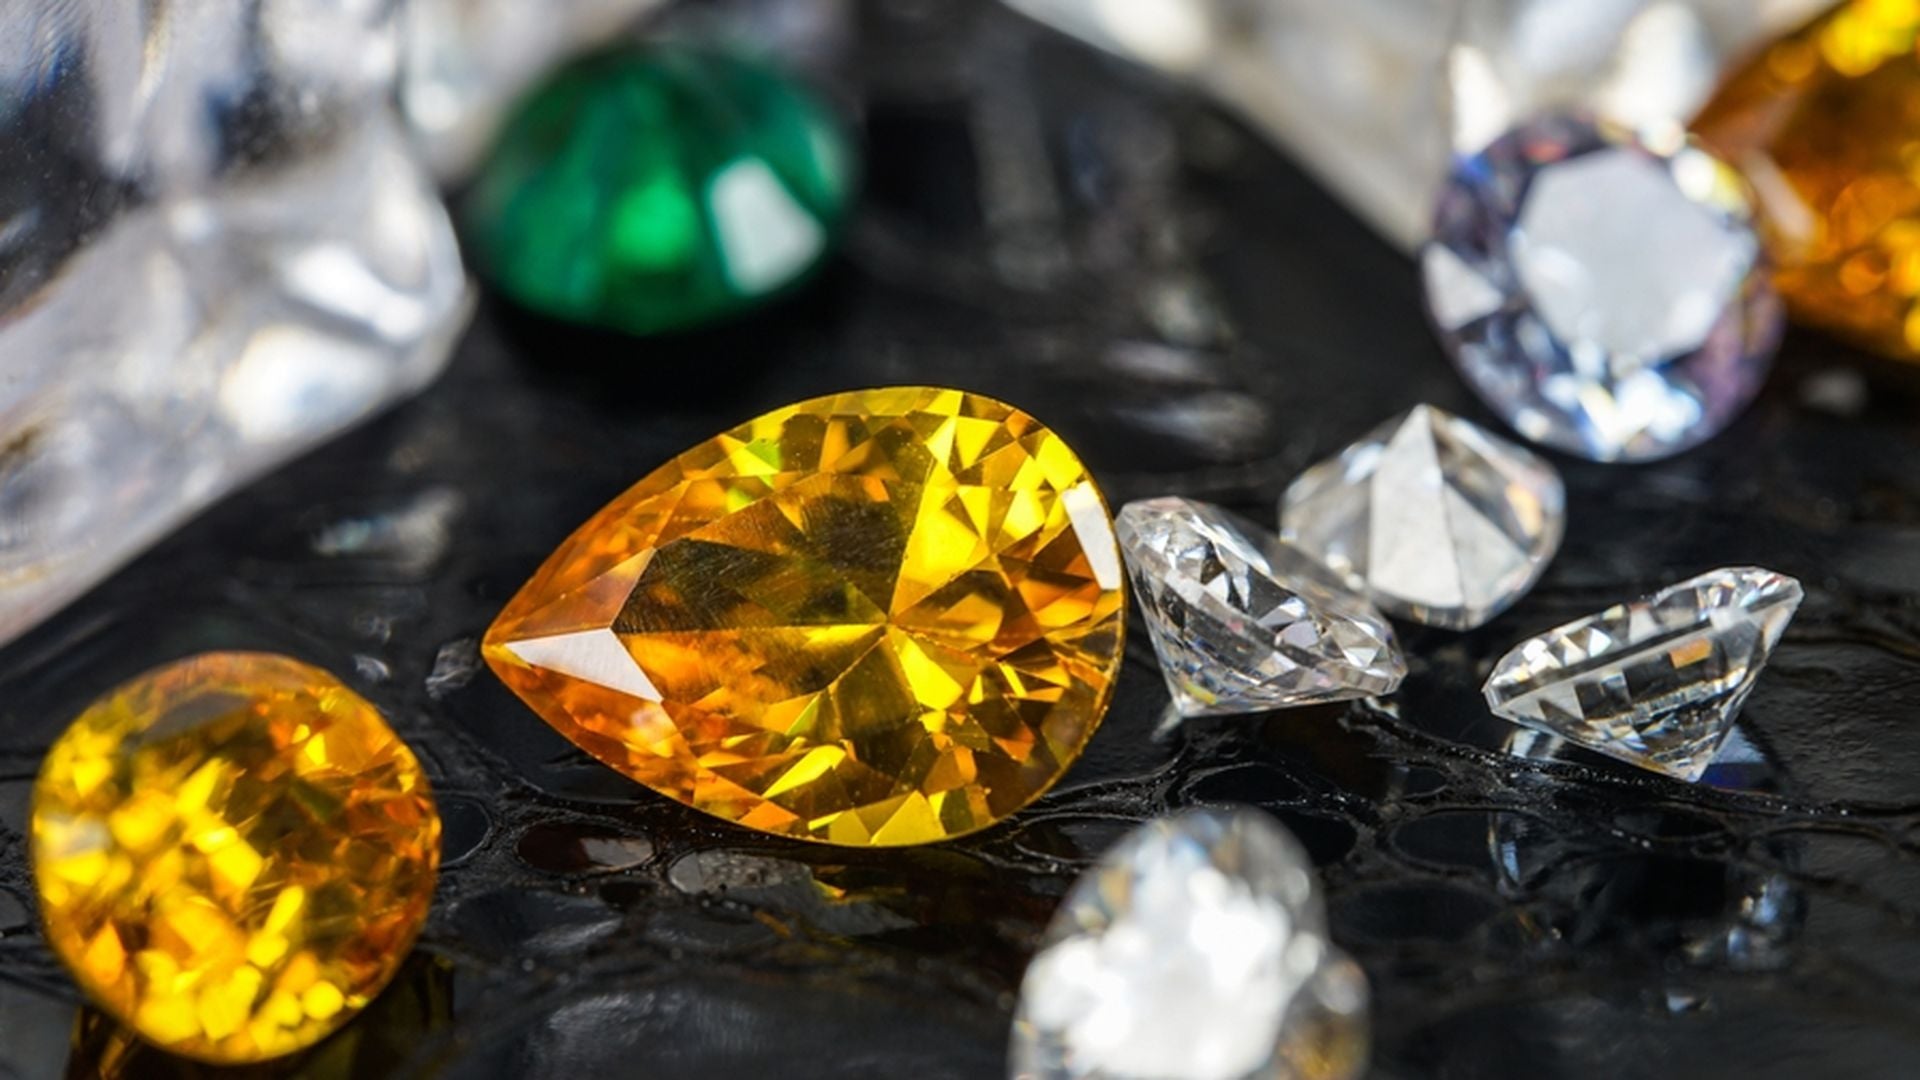 Not just diamonds - we can lab-grow sapphires, emeralds and more